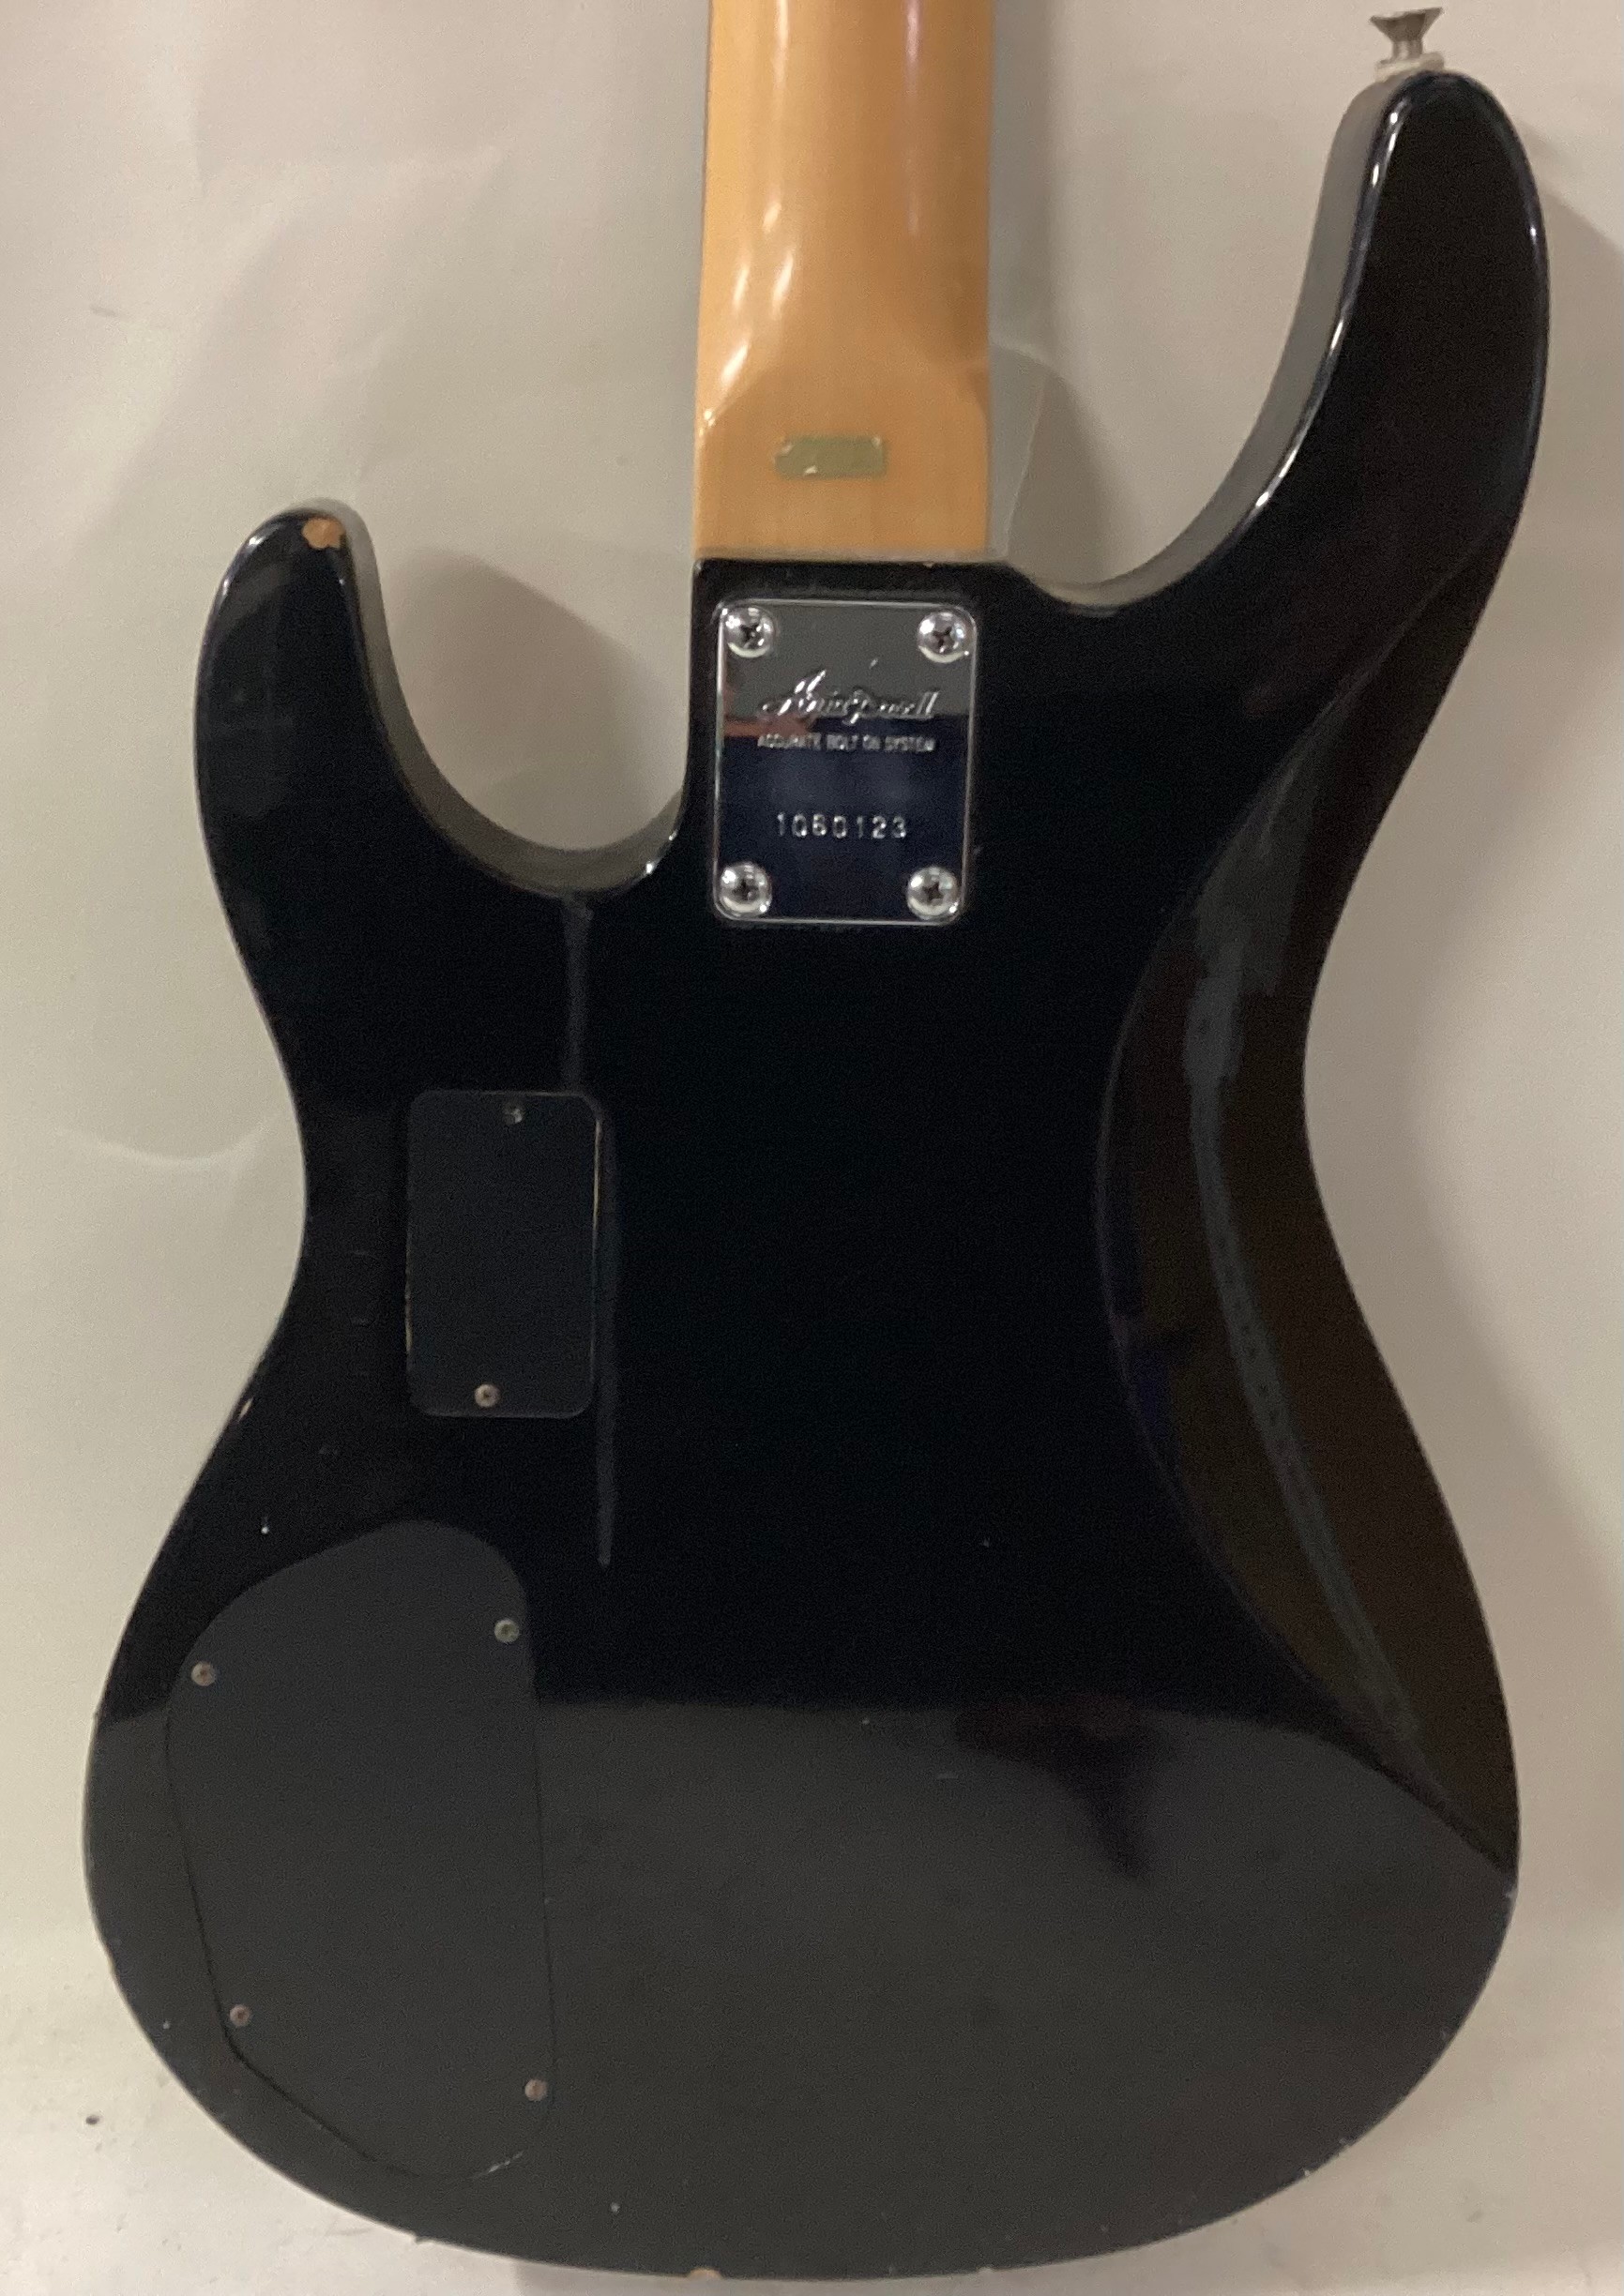 ARIA PRO II SLB-2A BASS GUITAR. 1990s Aria Pro II SLB-2 bass guitar with Body finished in black. - Image 5 of 6